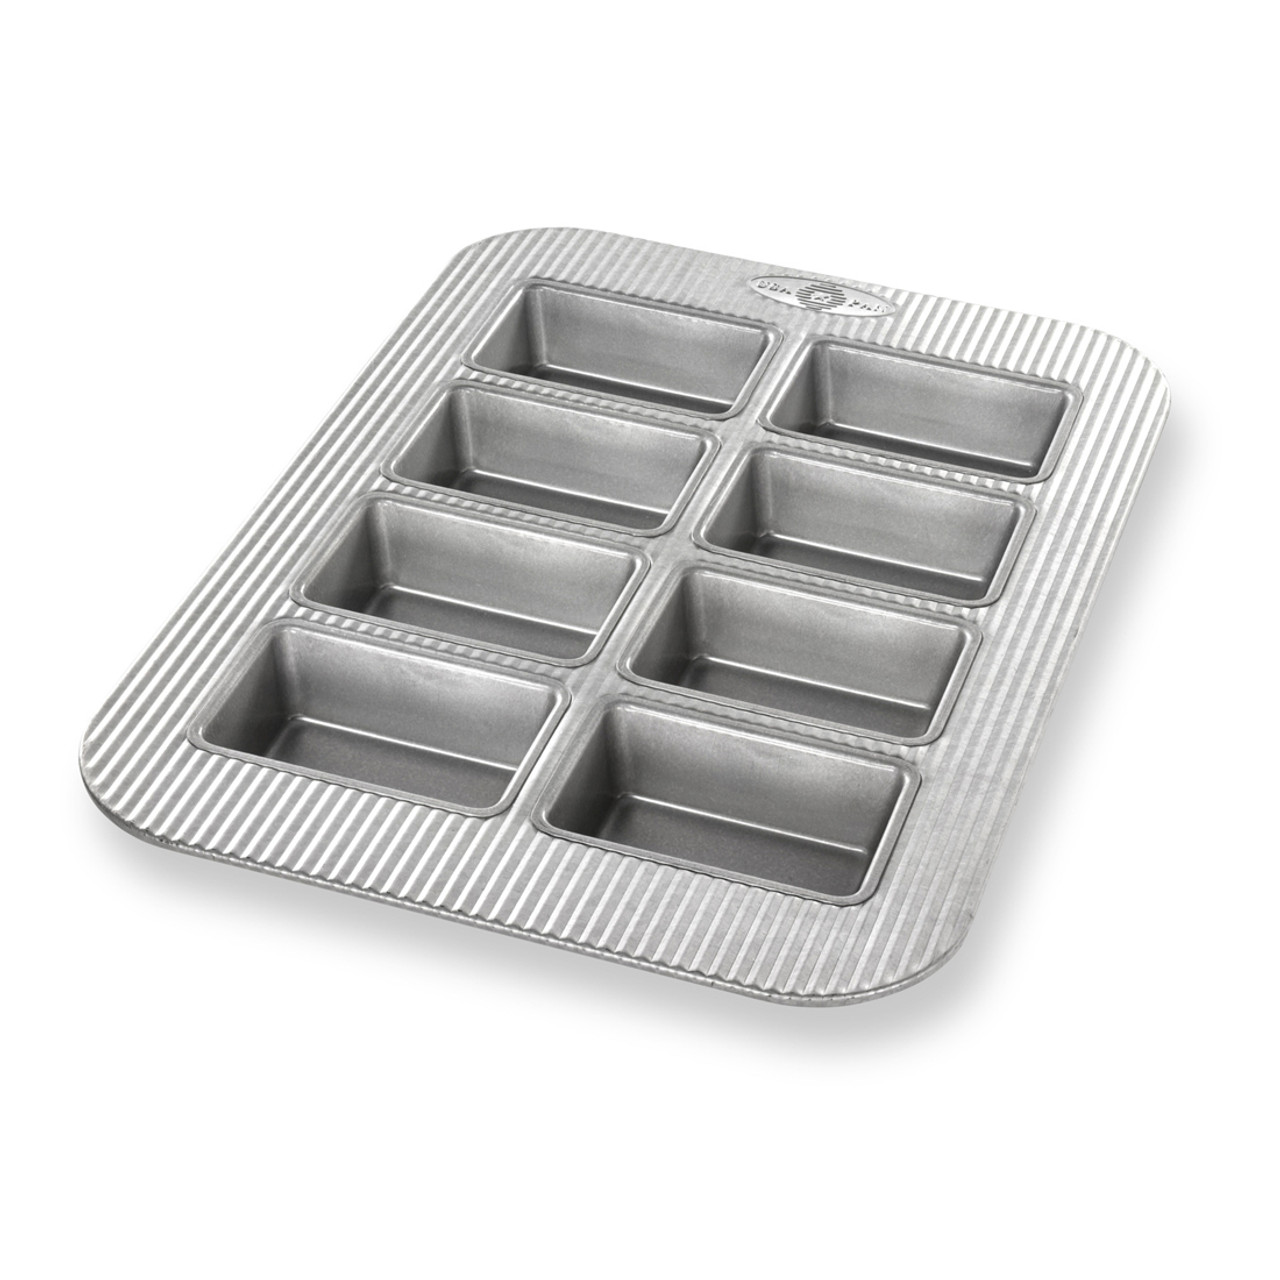 USA Pan American Bakeware Classics 1-Pound Loaf Pan, Aluminized Steel, 1  Pound